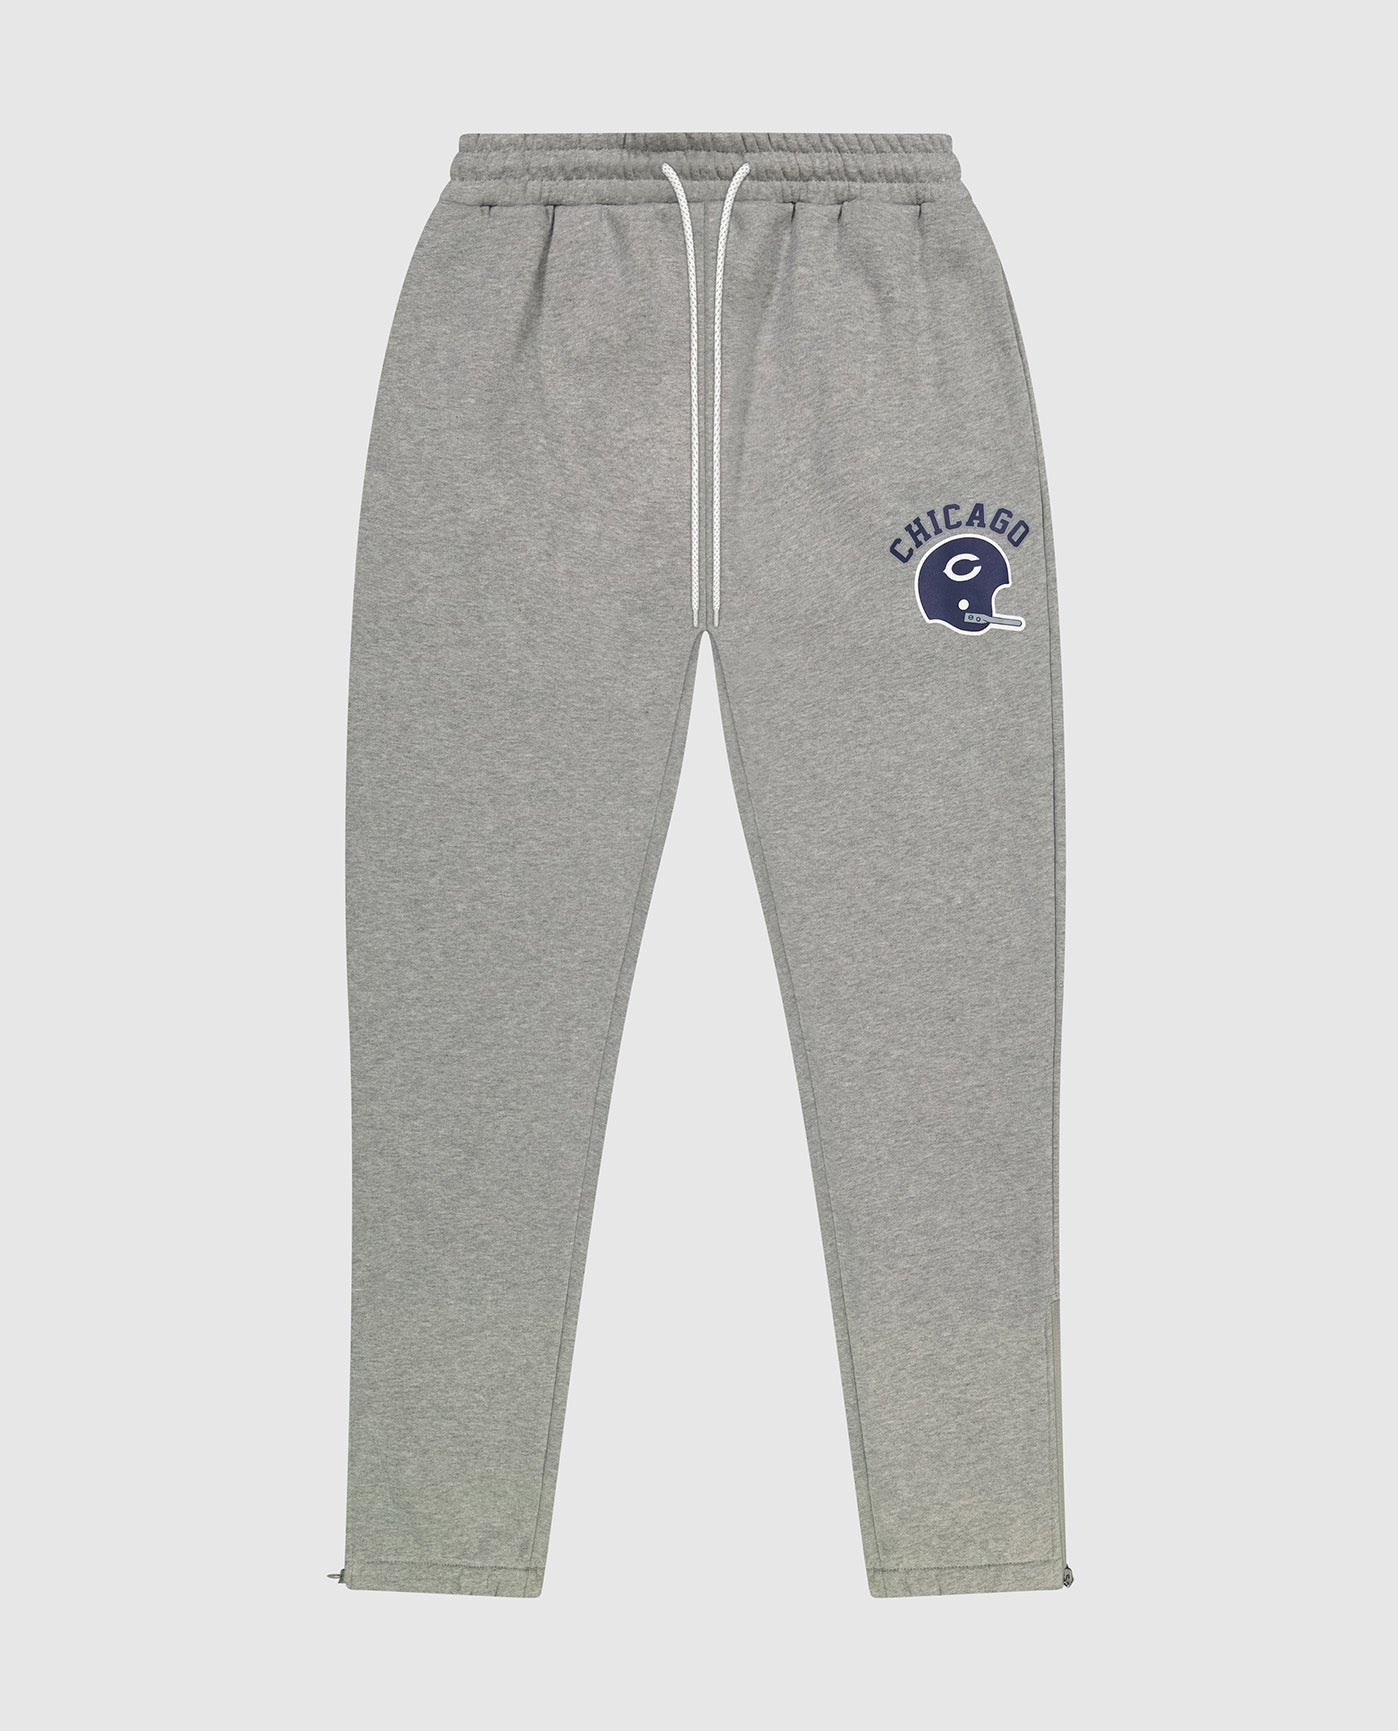 Front of Chicago Bears Sweatpants | Bears Heather Grey